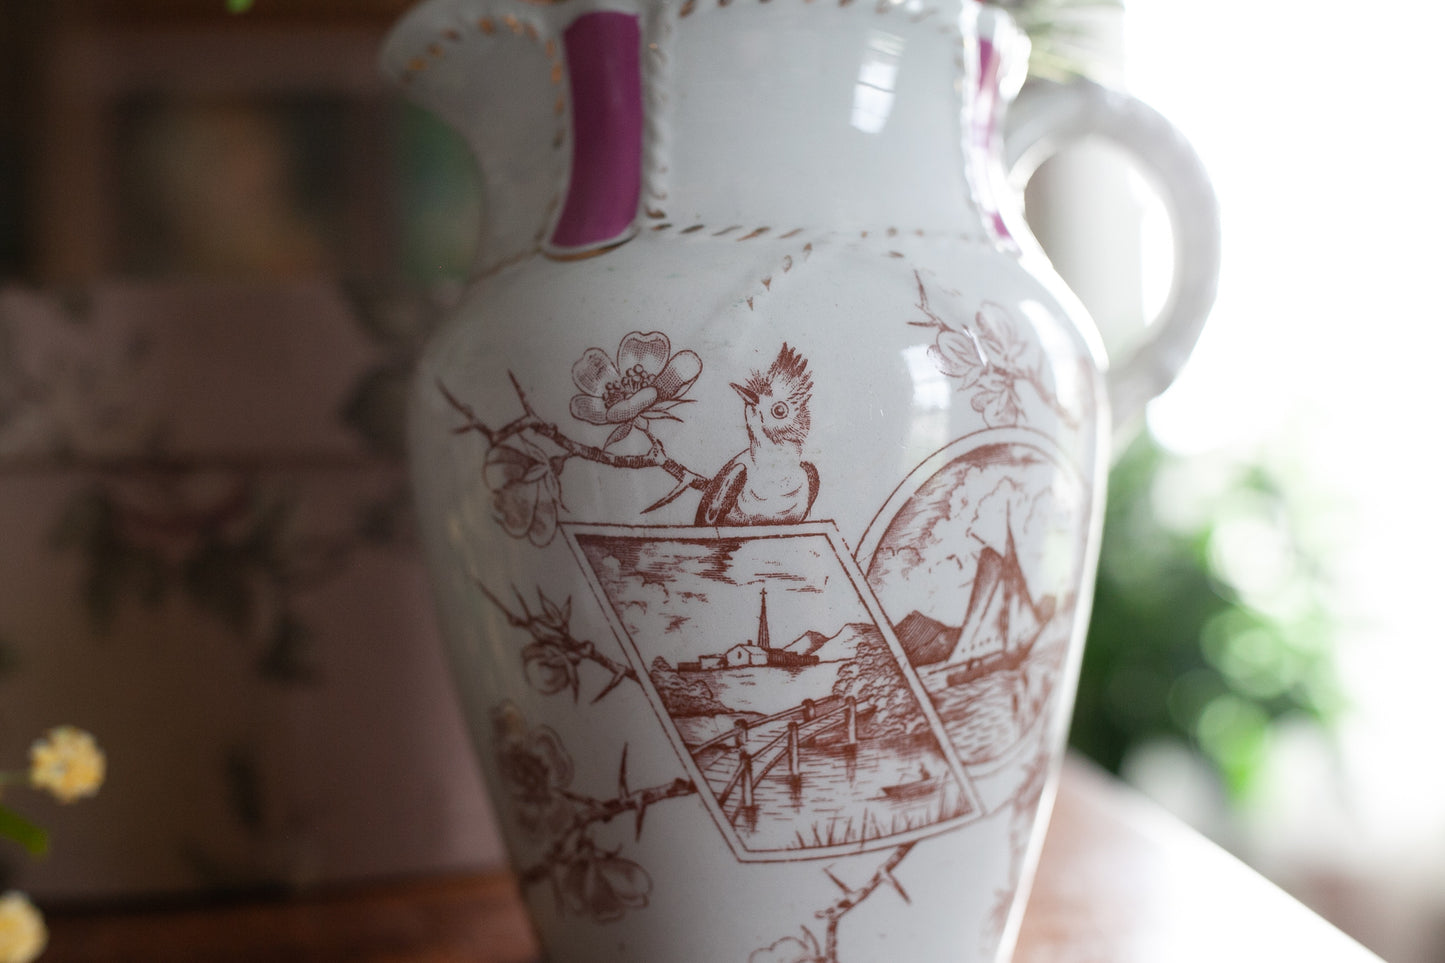 Vintage Pitcher with Bird Design - White and Pink Pitcher -Dresden stamped base